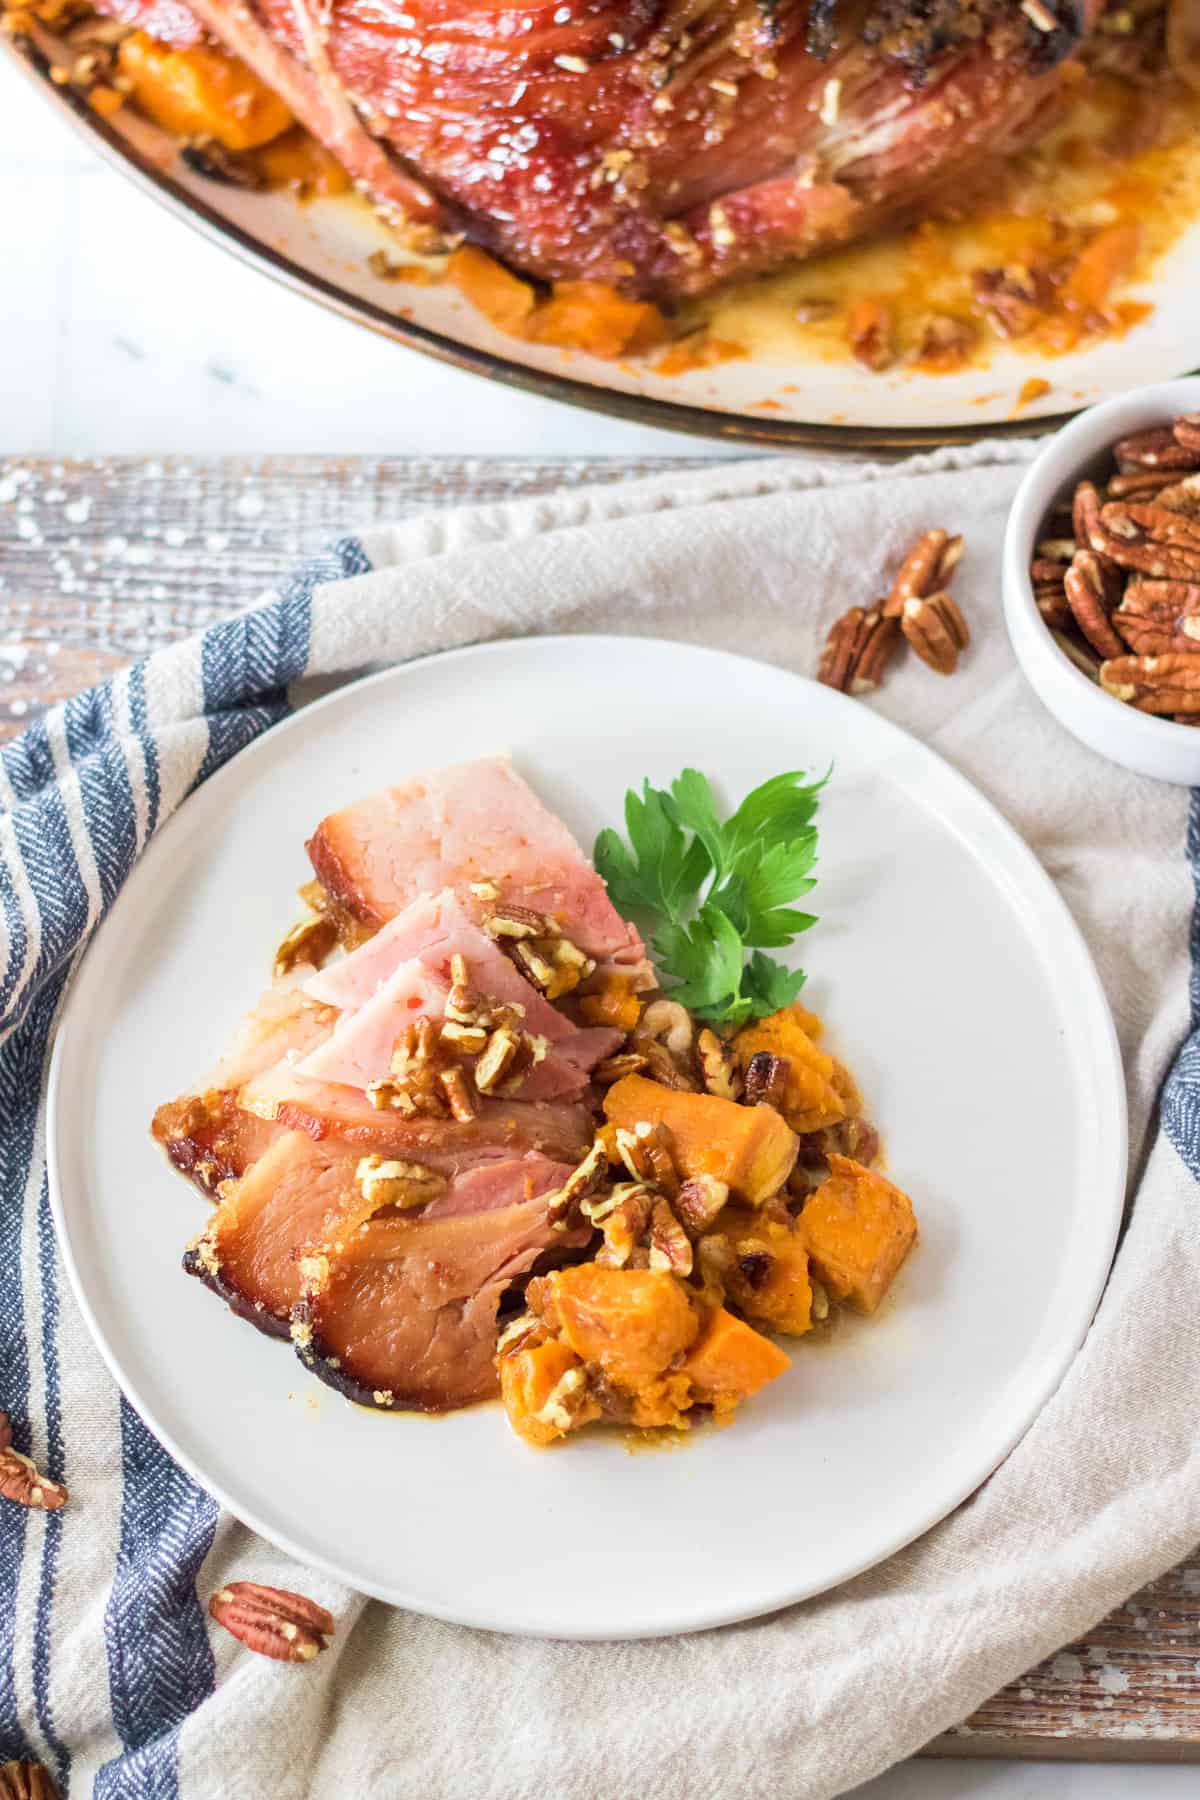 Sliced maple pecan ham served with sweet potatoes.